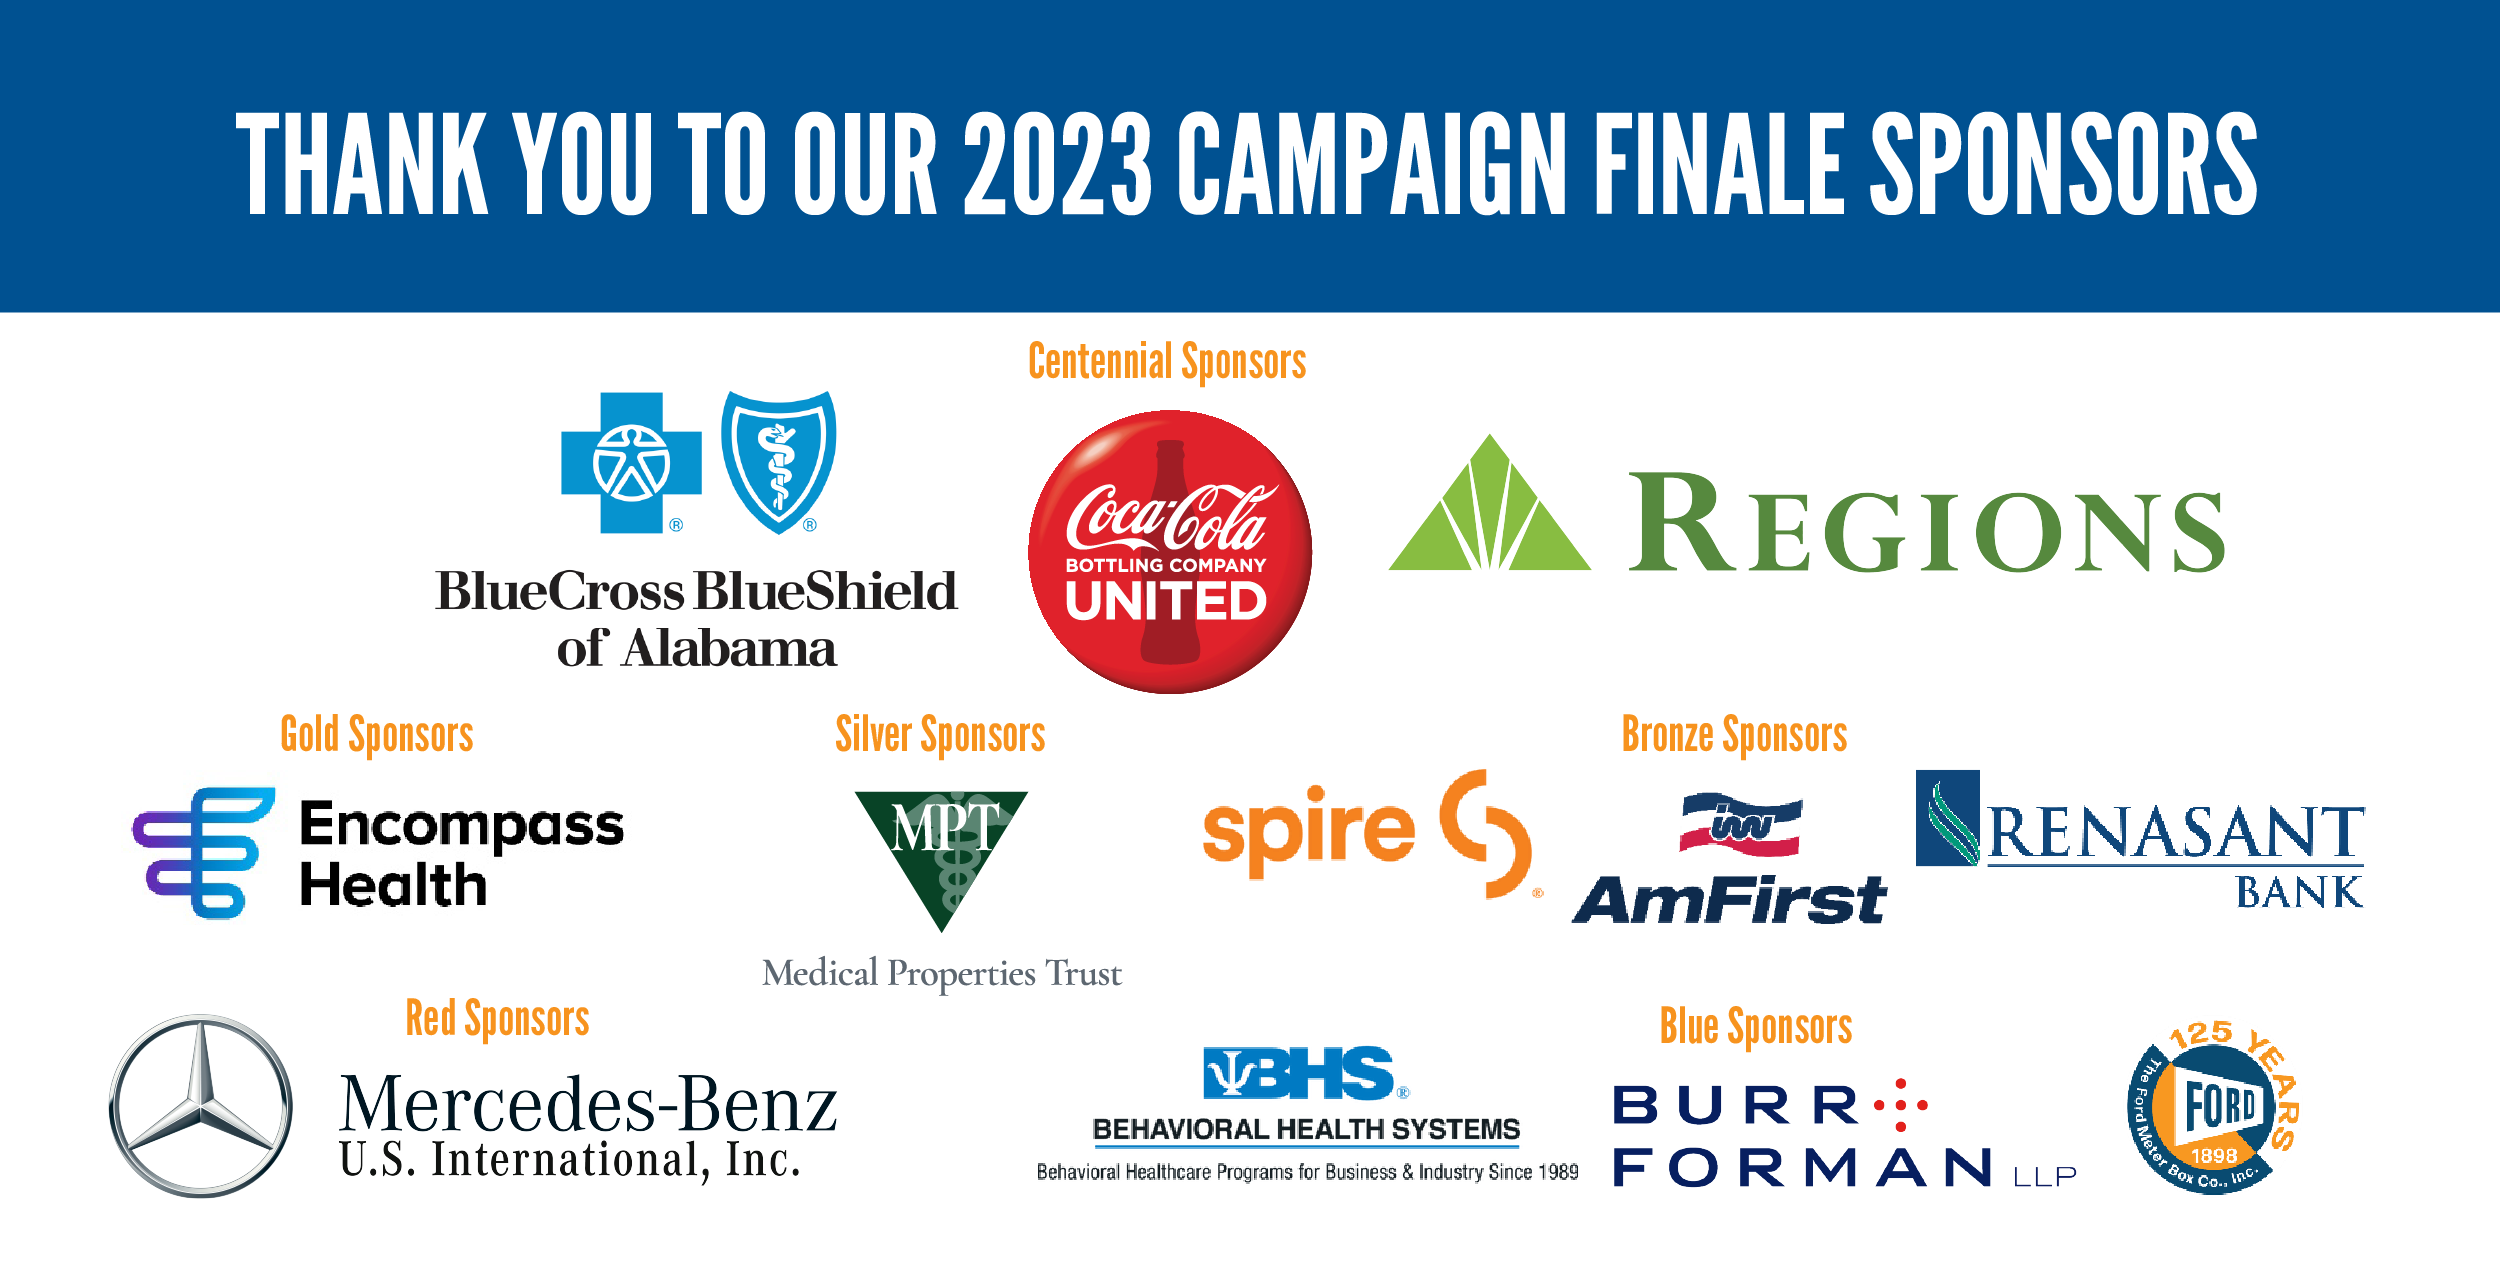 Thank you to the United Way of Central Alabama 2023 Campaign Finale Sponsors